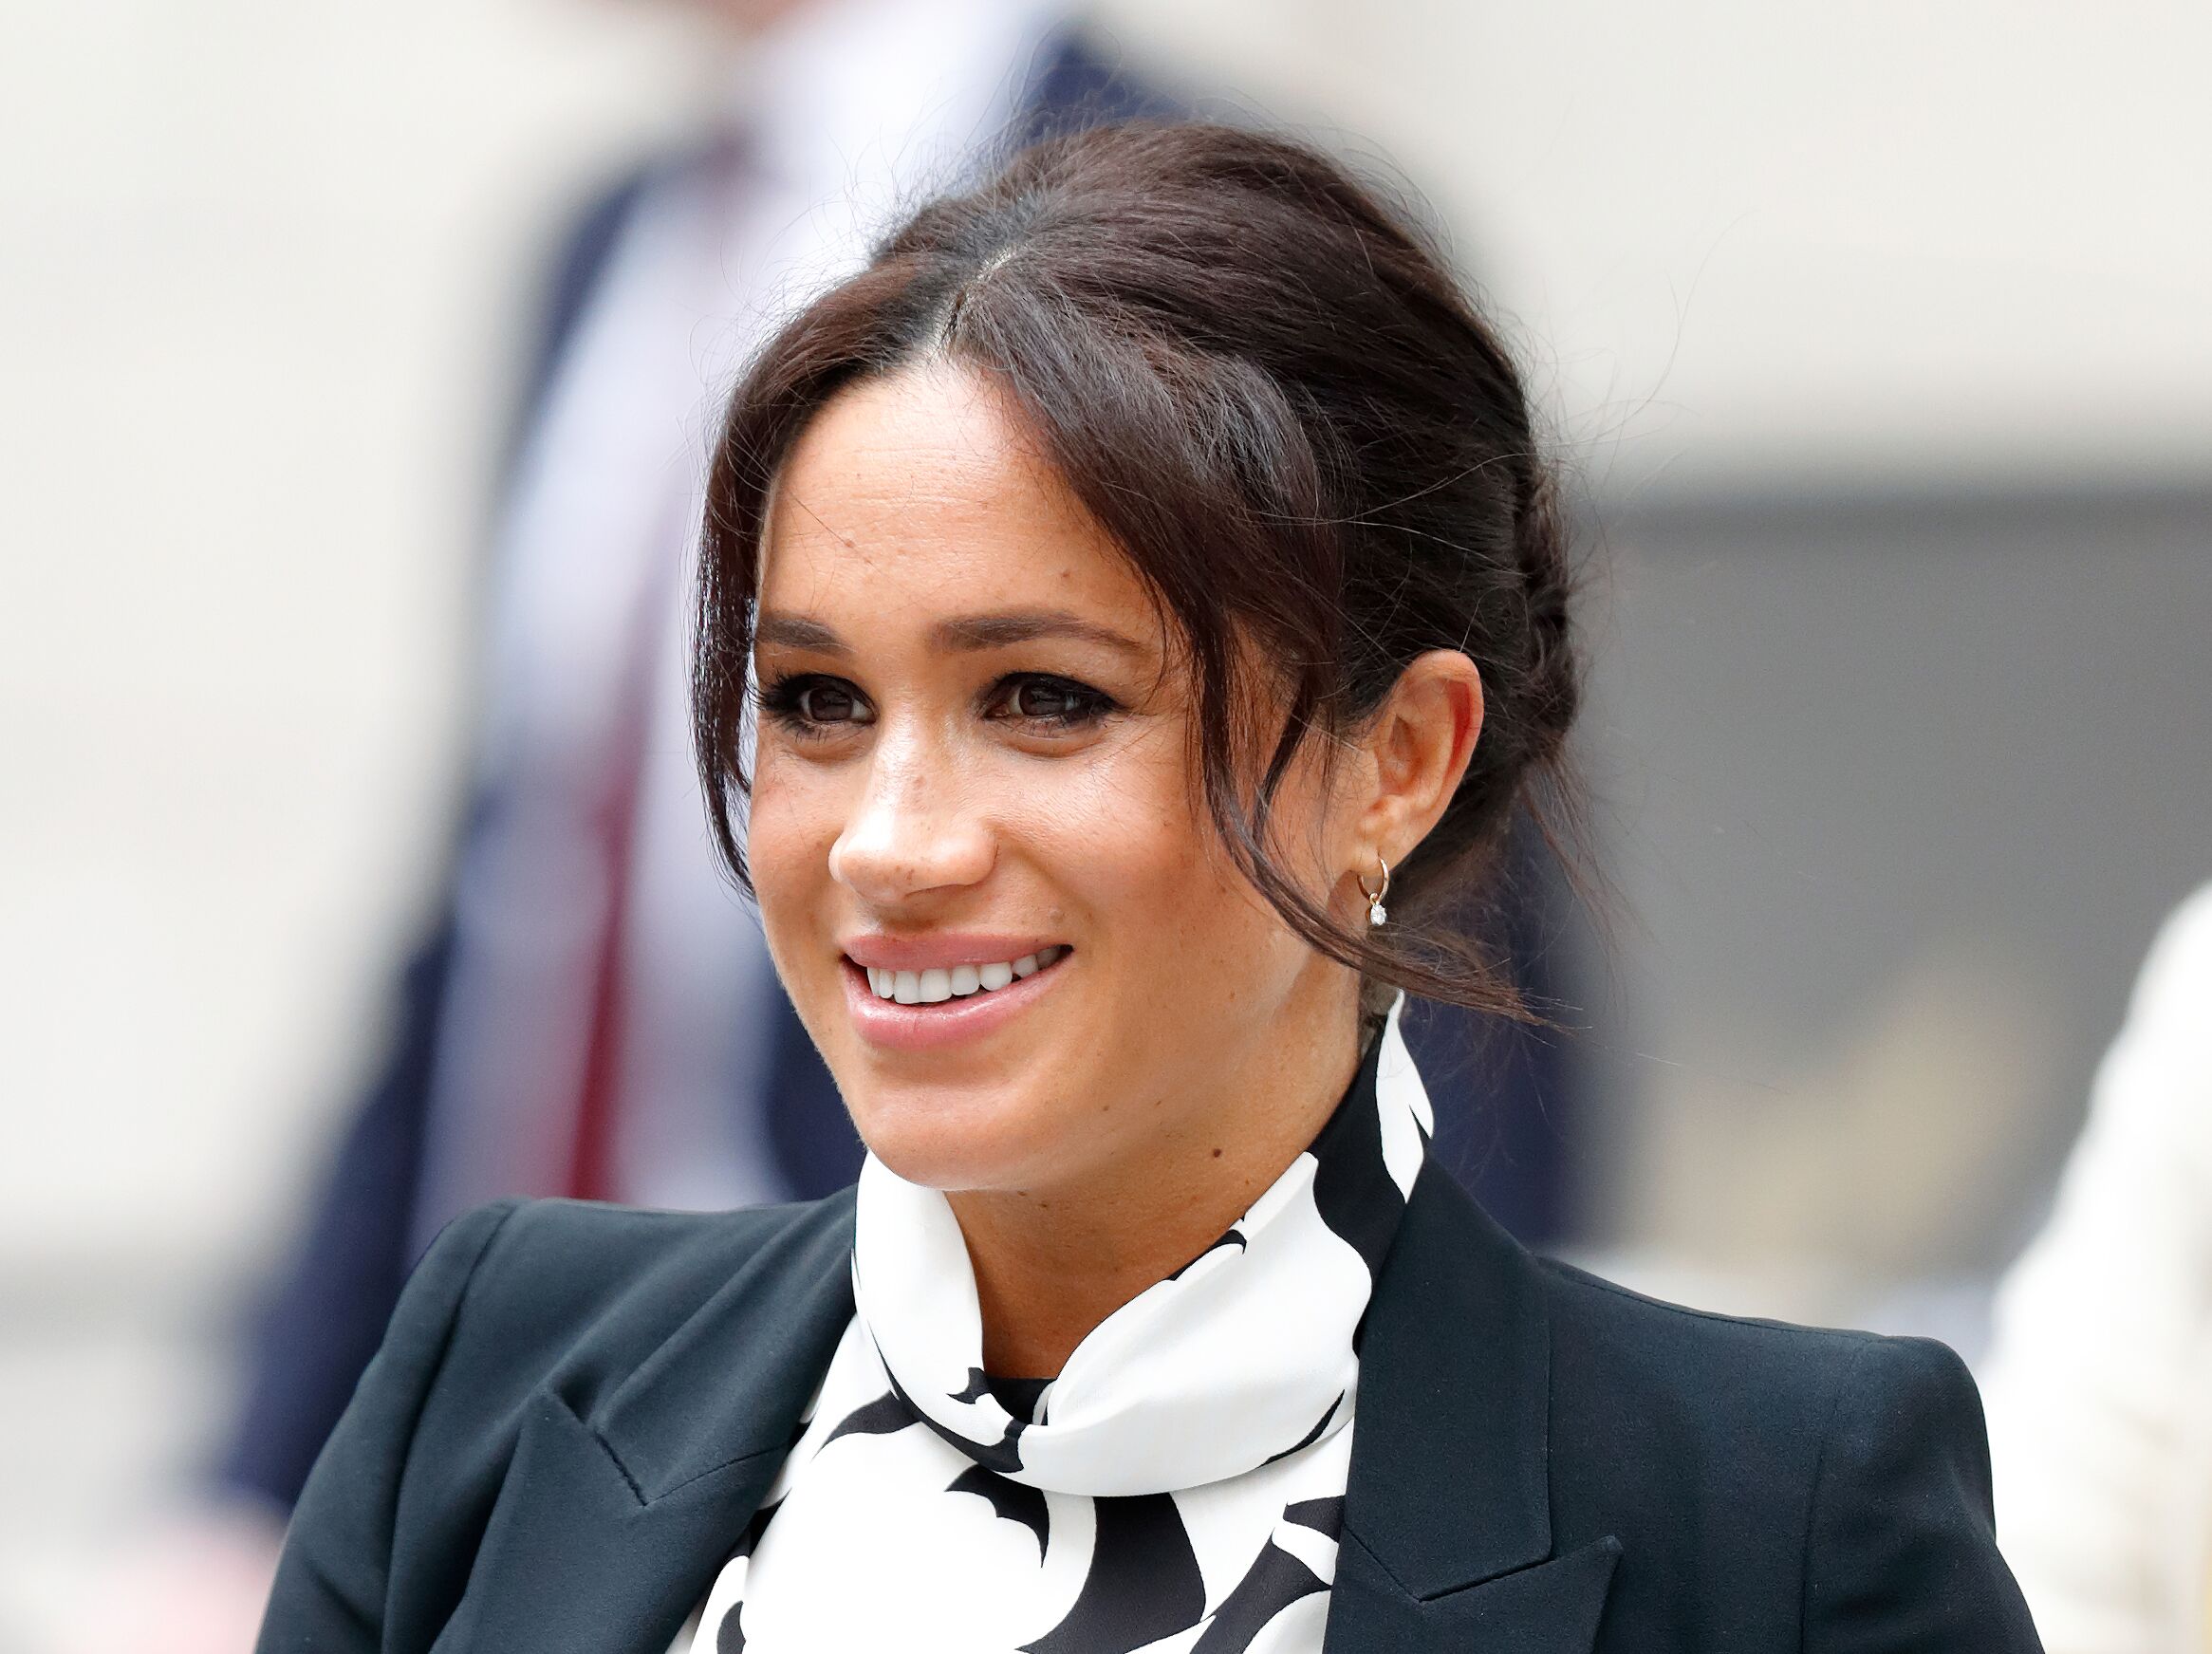 Duchess of Sussex attends a panel discussion, convened by The Queen's Commonwealth Trust, to mark International Women's Day at King's College London | Photo: Getty Images